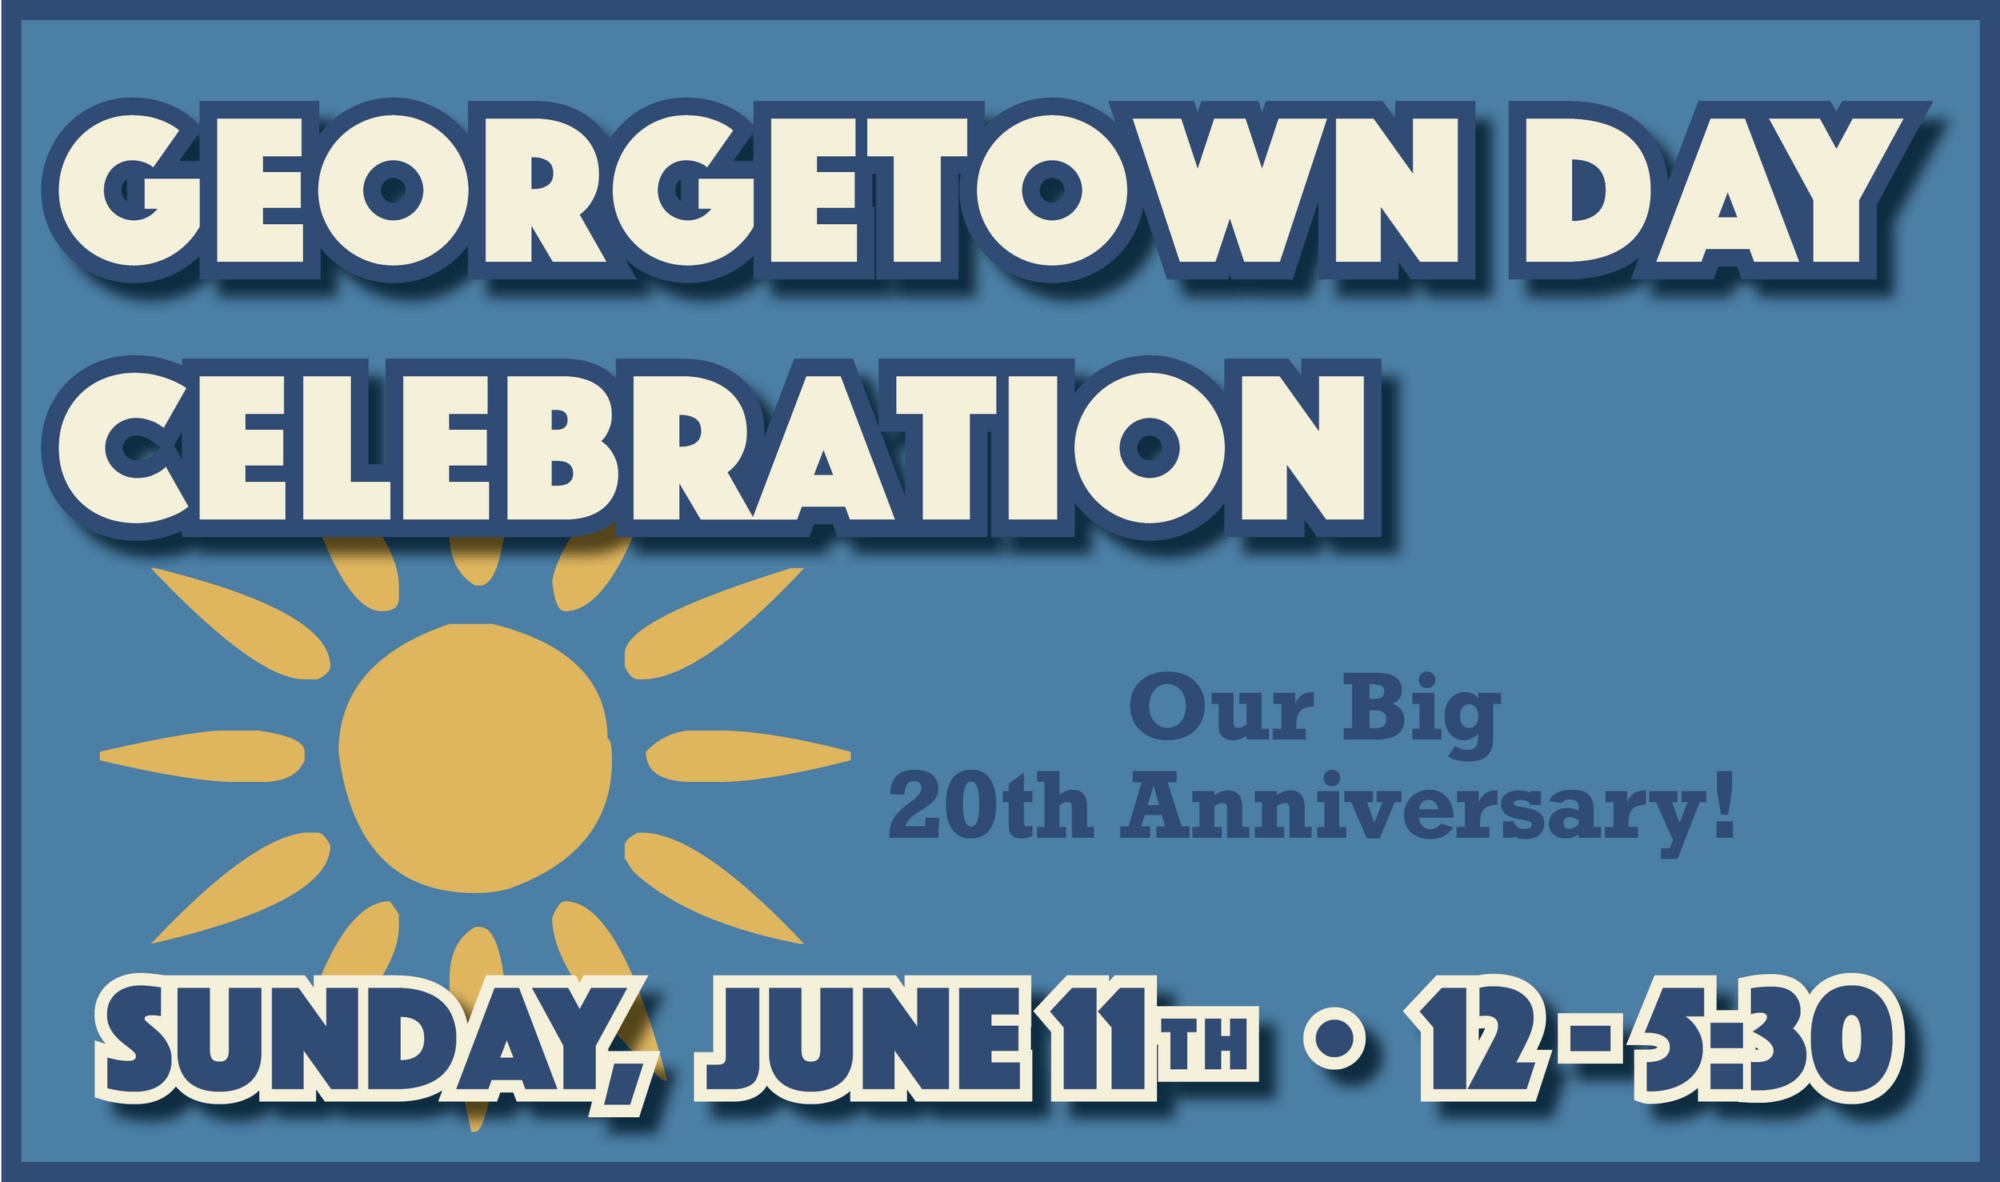 Georgetown Day banner - Event is June 11 at 12 to 5:30PM